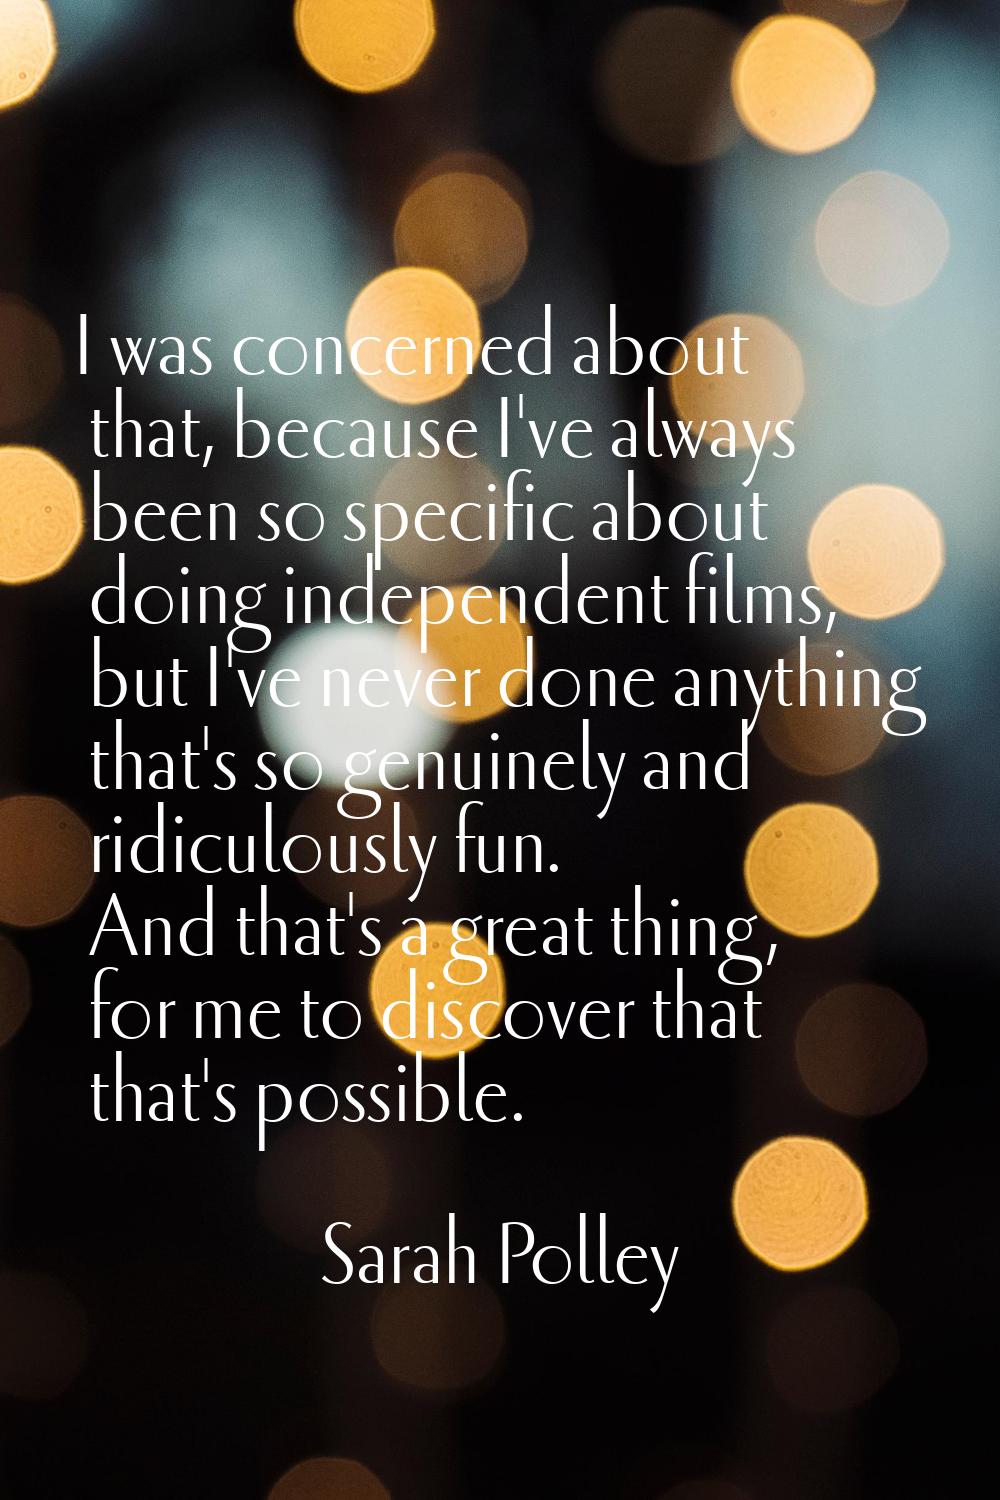 I was concerned about that, because I've always been so specific about doing independent films, but